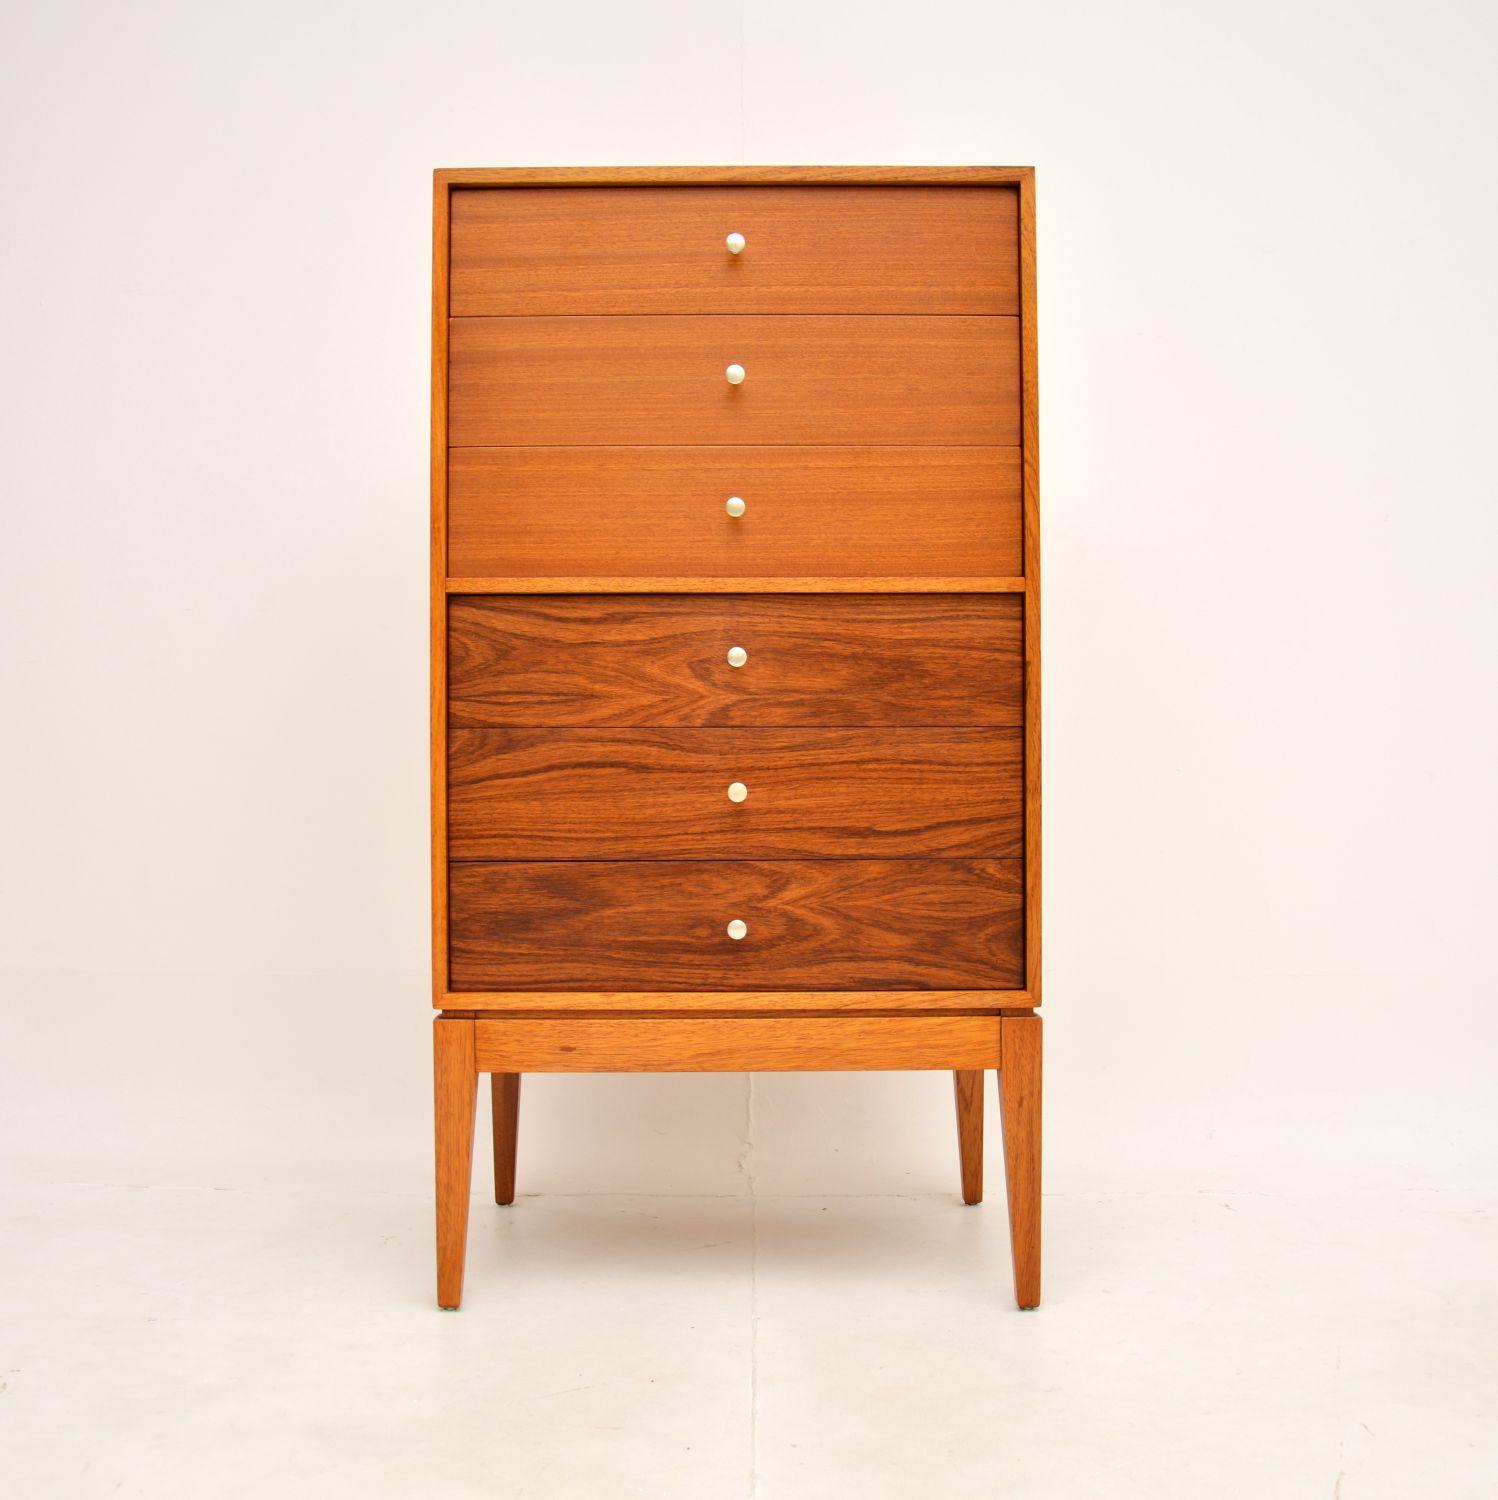 A very stylish and extremely well made vintage chest of drawers by Uniflex. This was made in England, it dates from the 1950-60’s.

It is of superb quality and is a very useful size. It is tall and slim, with lots of storage space. The drawer fronts